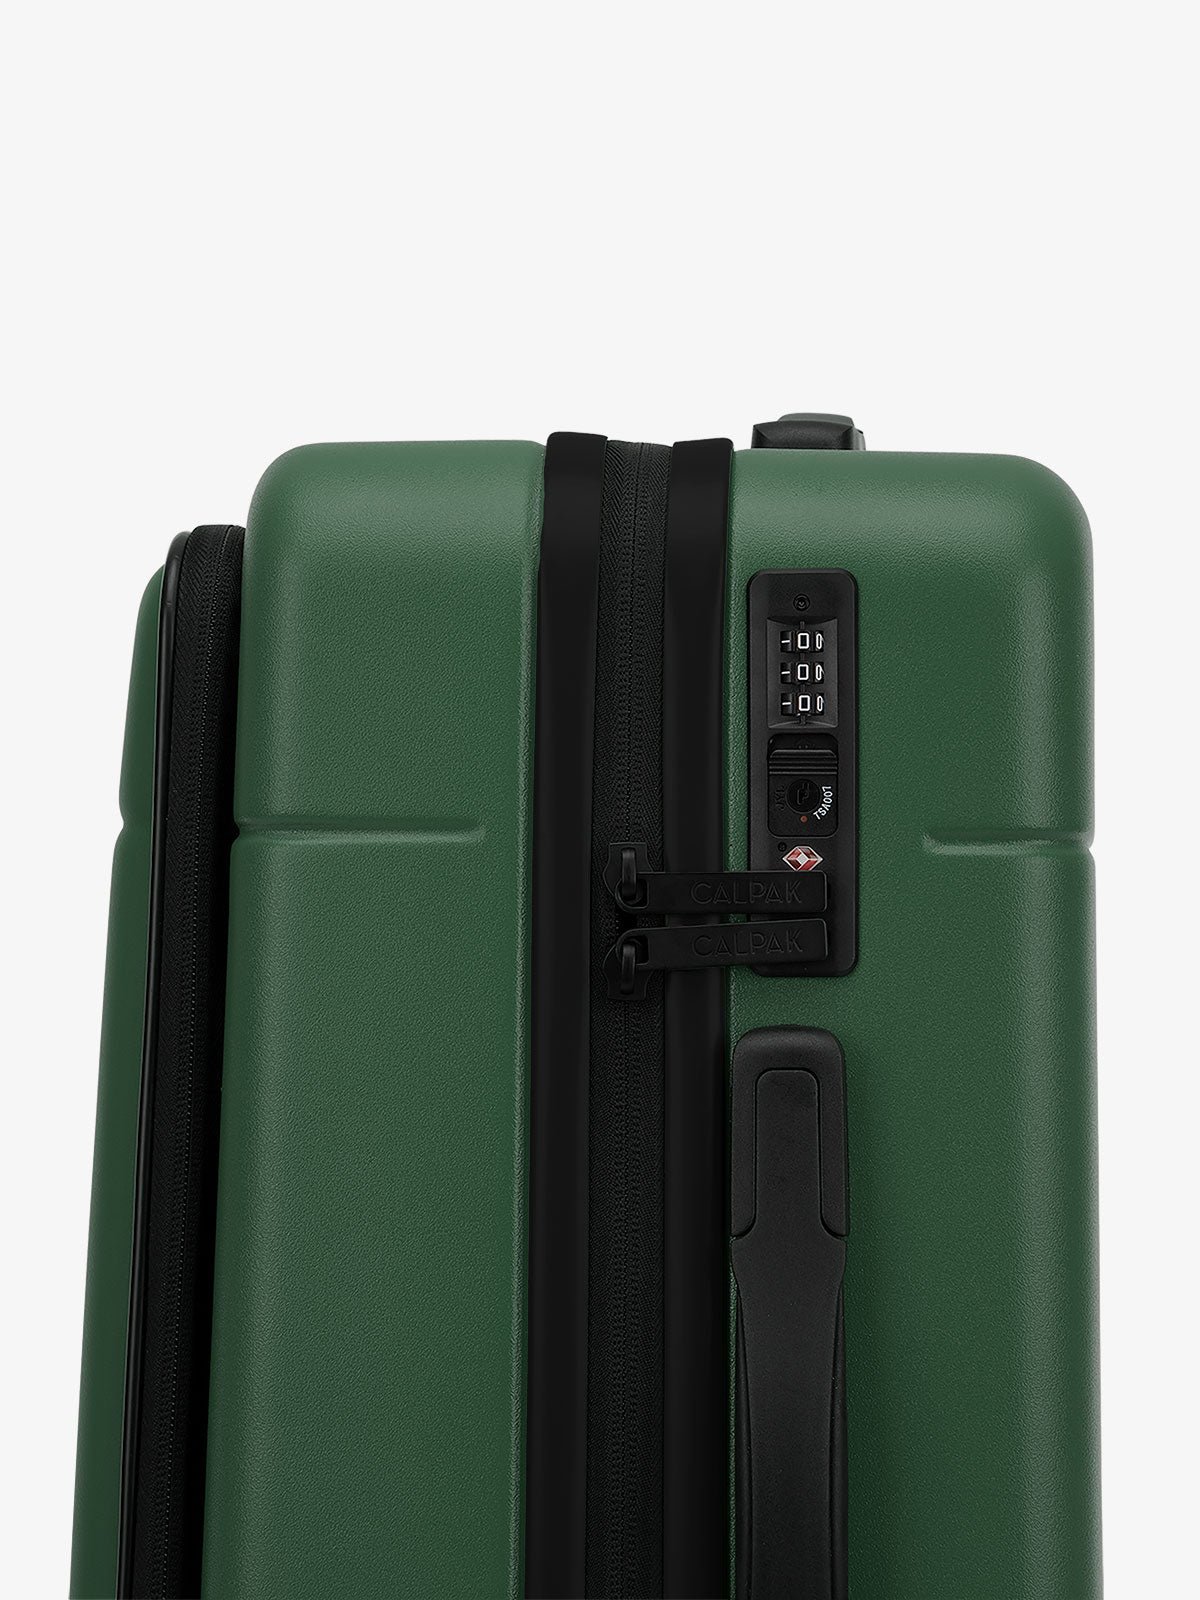 CALPAK Hue Front Pocket Carry-On Luggage with tsa approved lock in green emerald